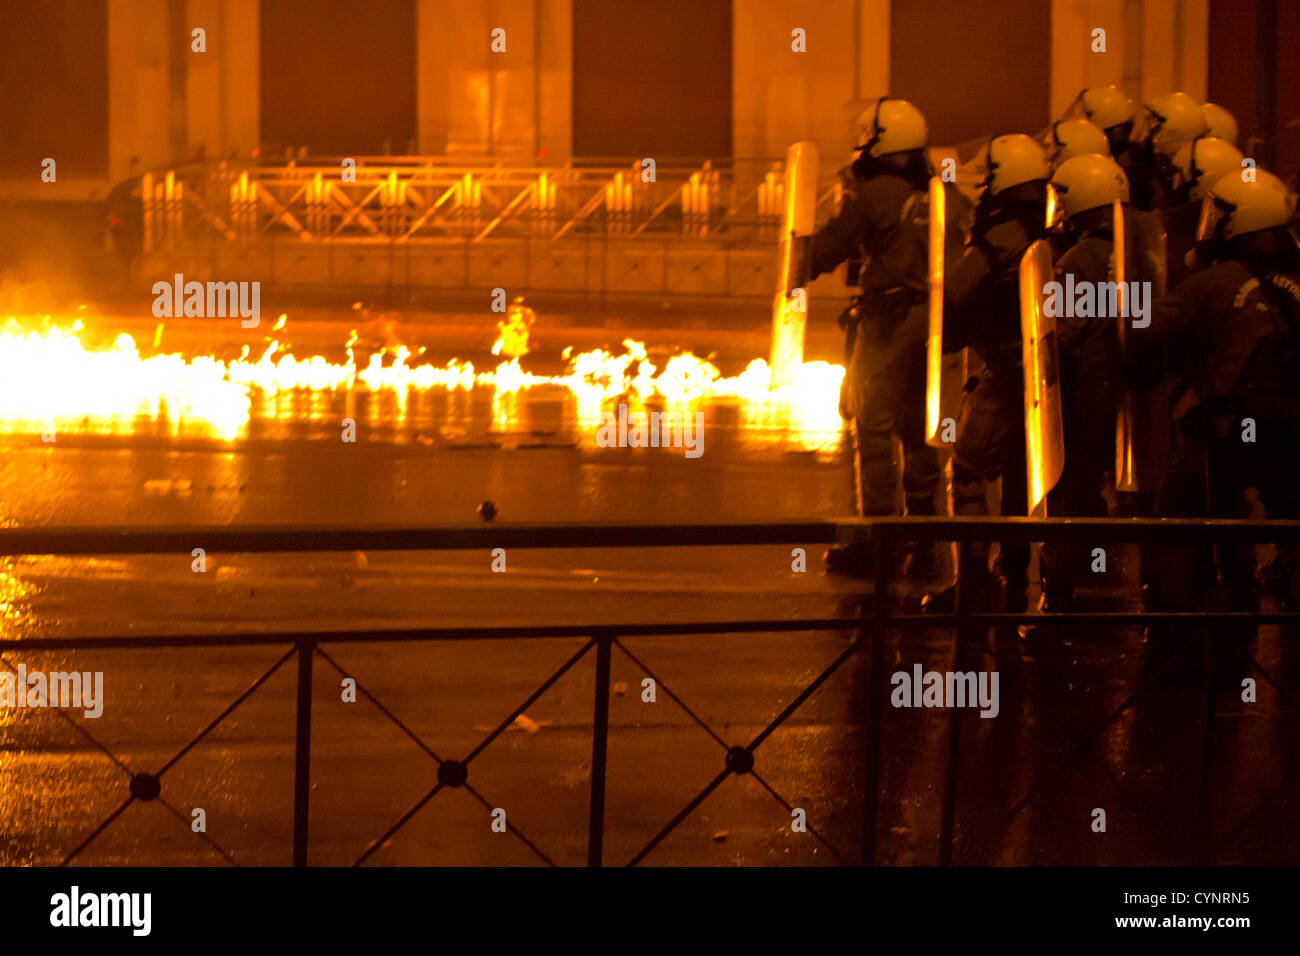 Flames surround riot policemen outside the Greek Parliament. Stock Photo